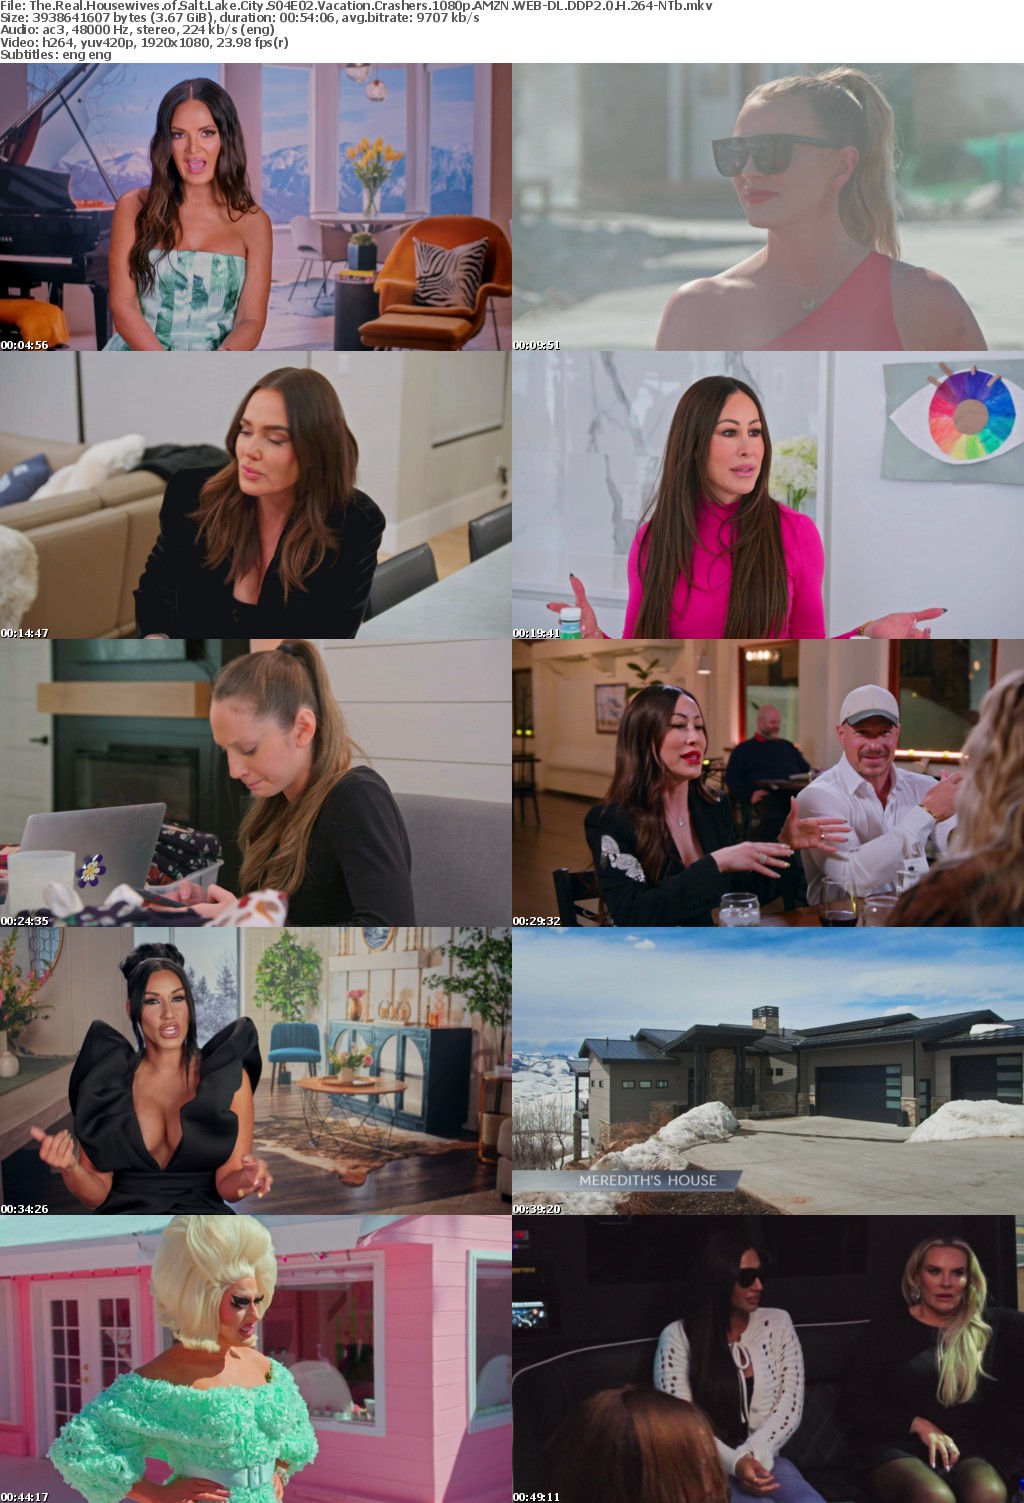 The Real Housewives of Salt Lake City S04E02 Vacation Crashers 1080p AMZN WEB-DL DDP2 0 H 264-NTb